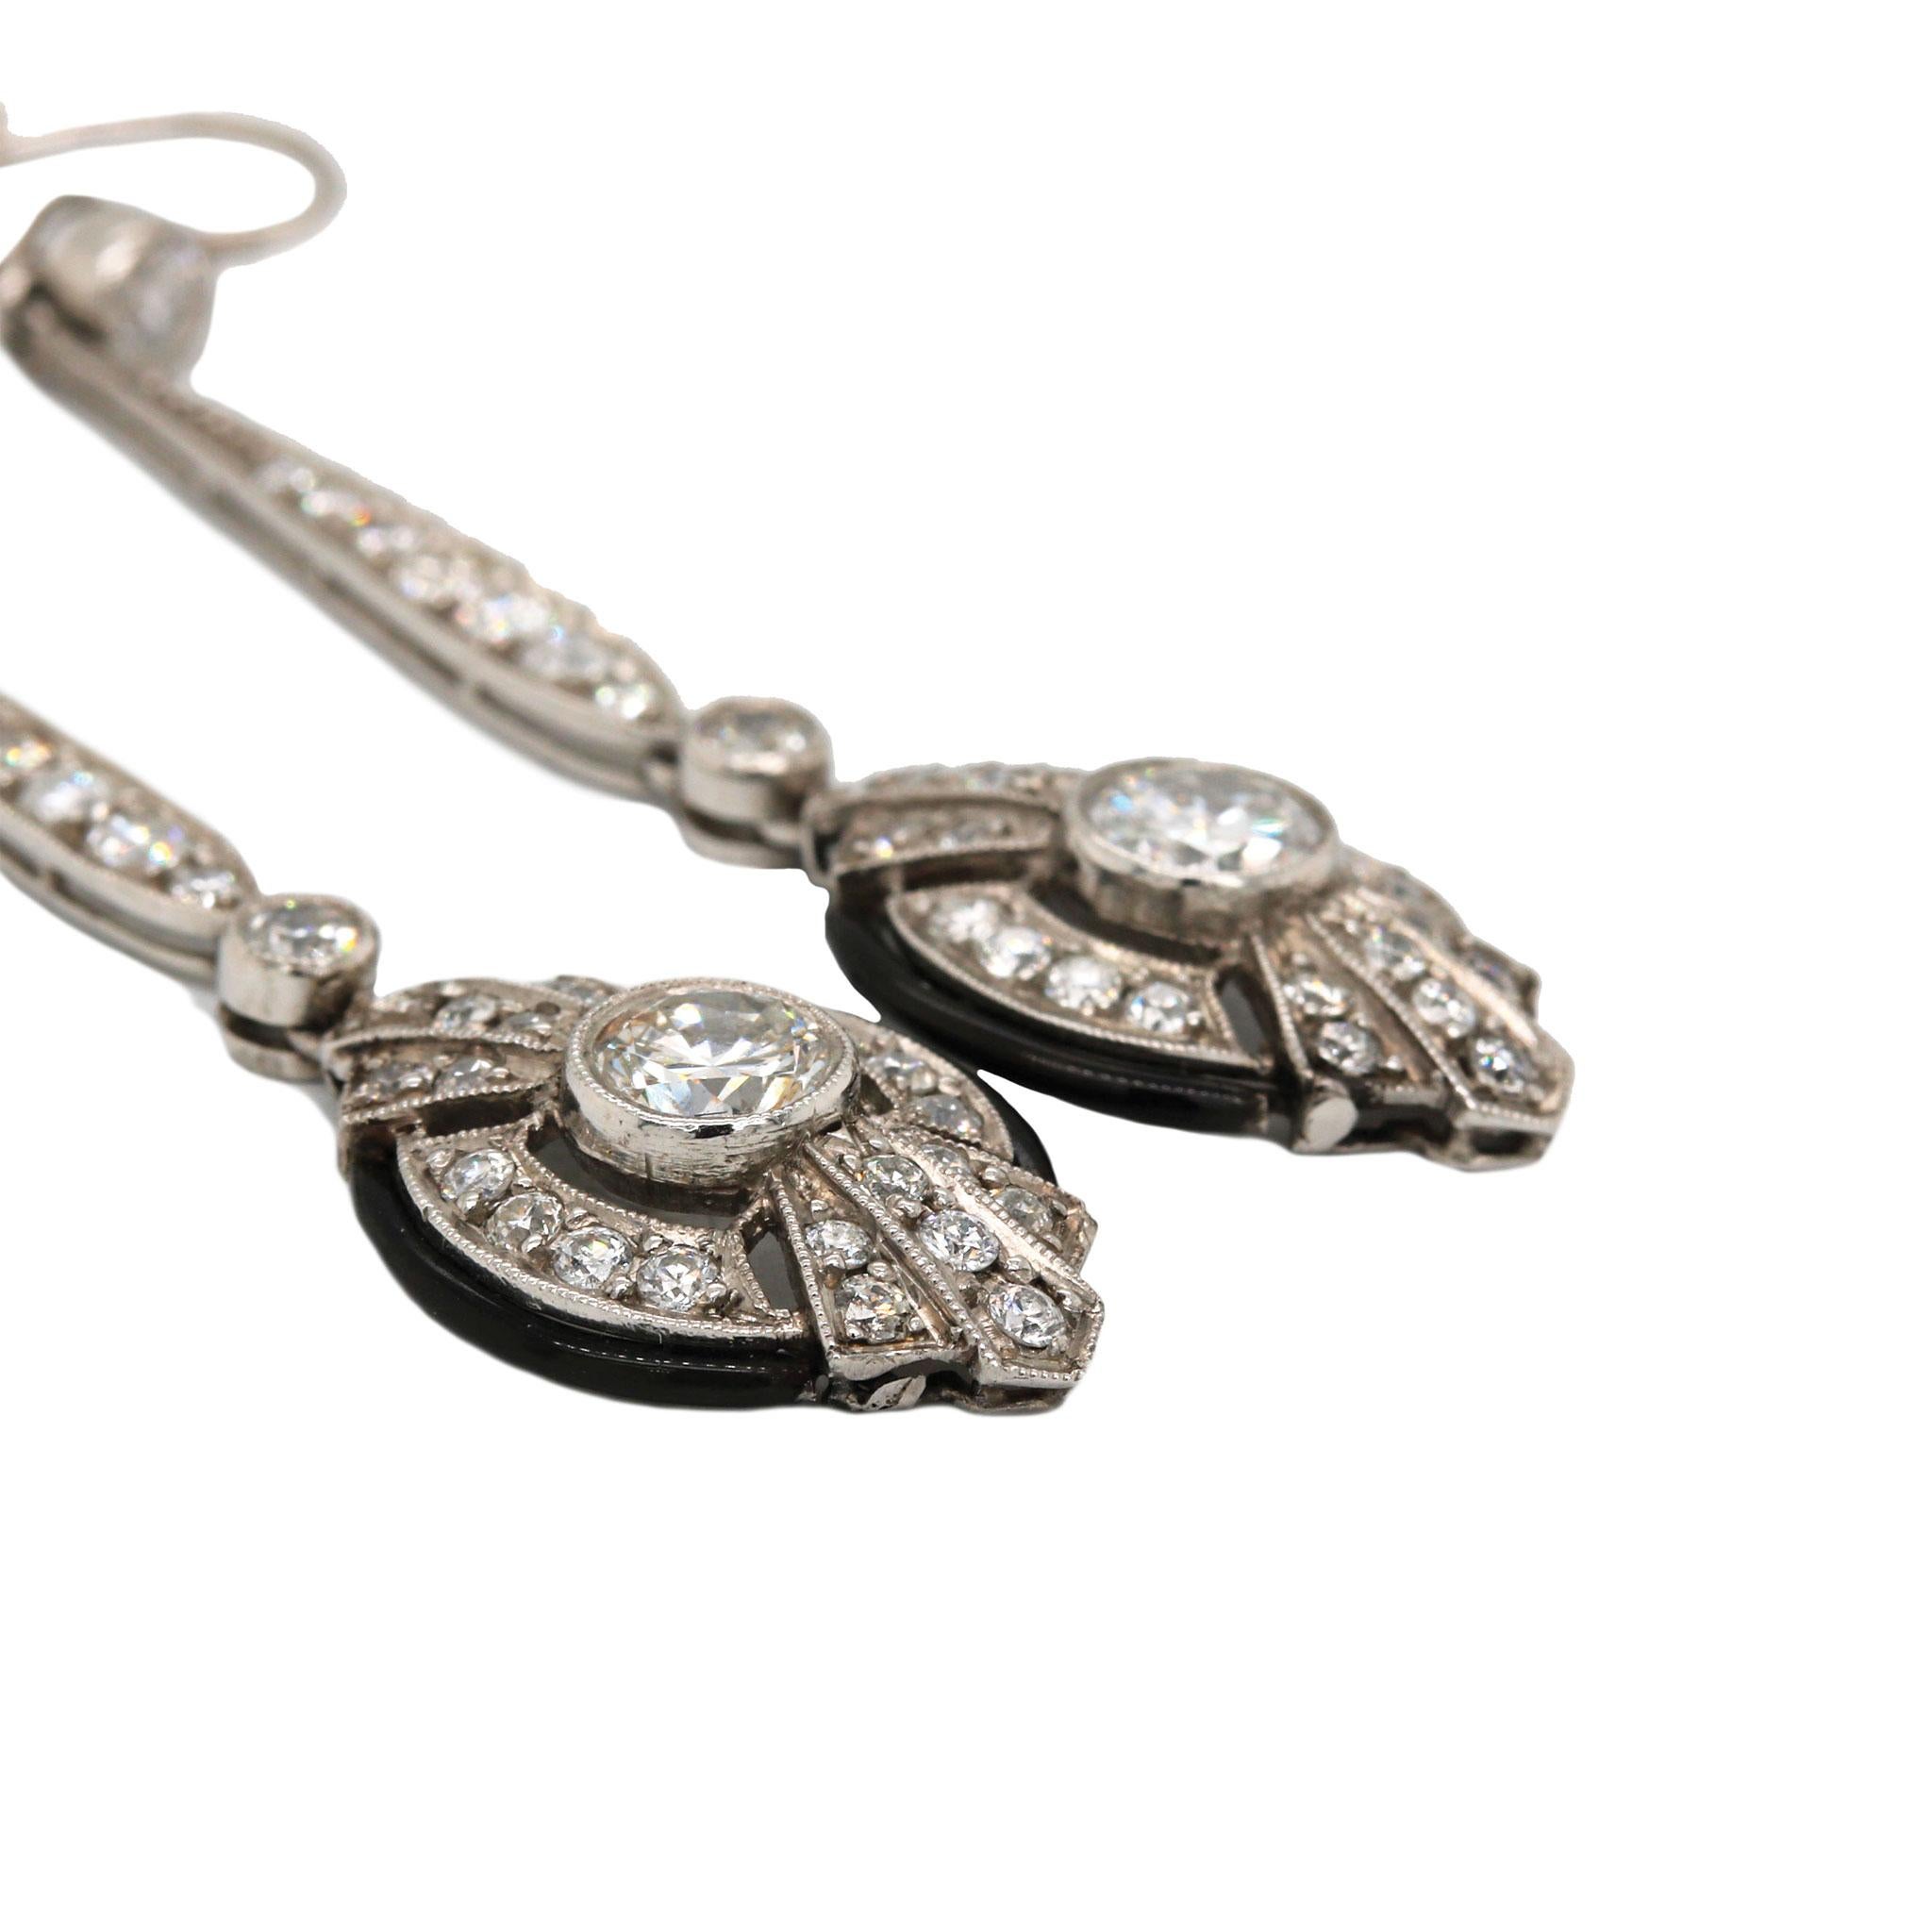 A pair of Art Deco era platinum diamond dangle earrings, with a combination of Old European Cut and brilliant cut diamond accents. These collectible earrings are bezel set with two center round brilliant cuts that total 0.77ctw, graded G-H in color,